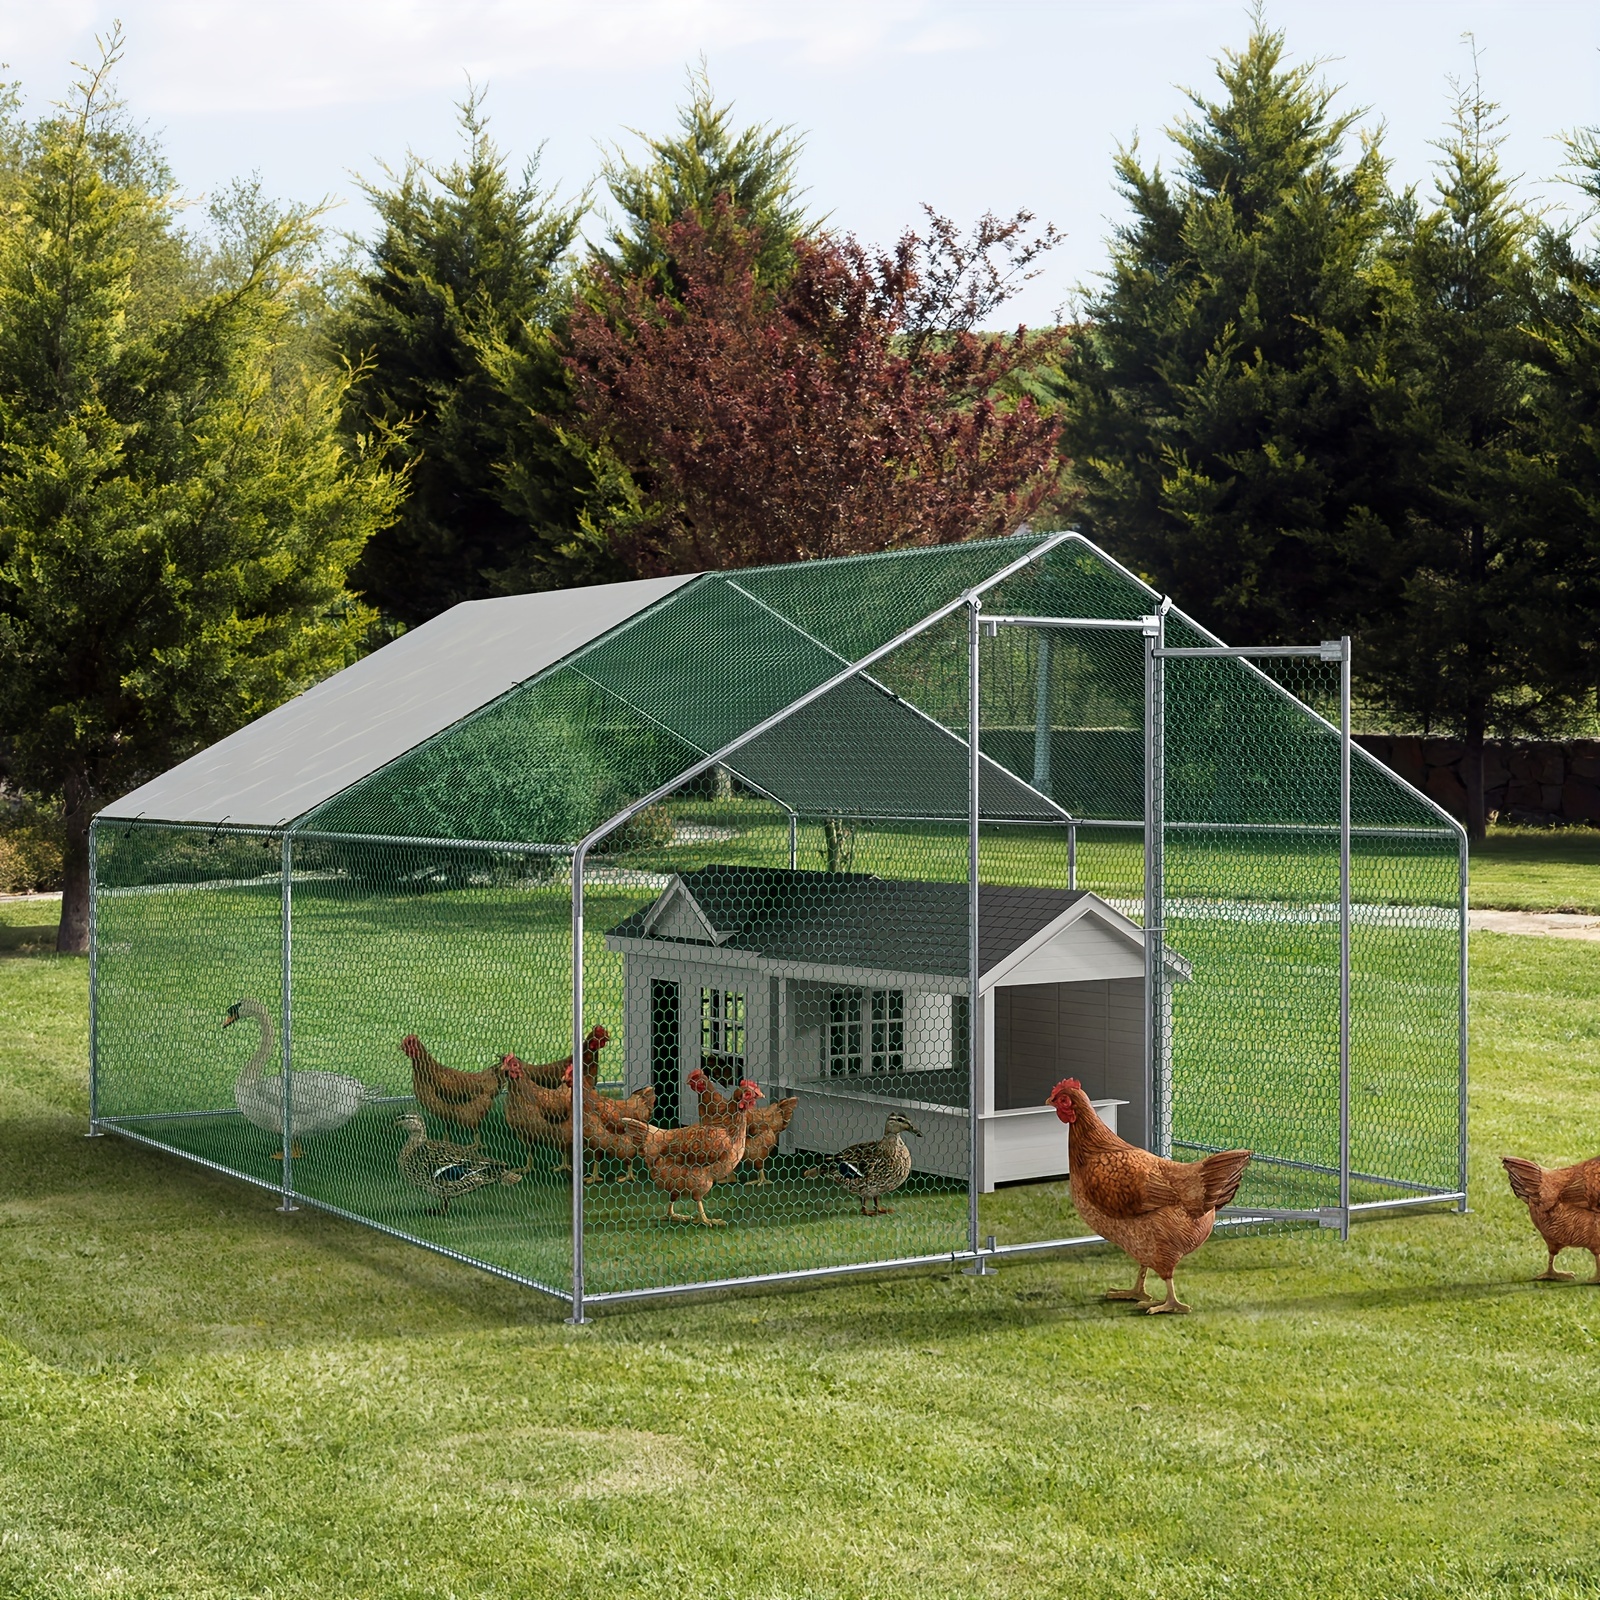 

Large Metal Chicken Coop, Chicken Runs For Yard With Waterproof And Anti-uv Cover, Walk-in Poultry Duck Goose Hen Rabbit House Cage For Outdoor Farm Use